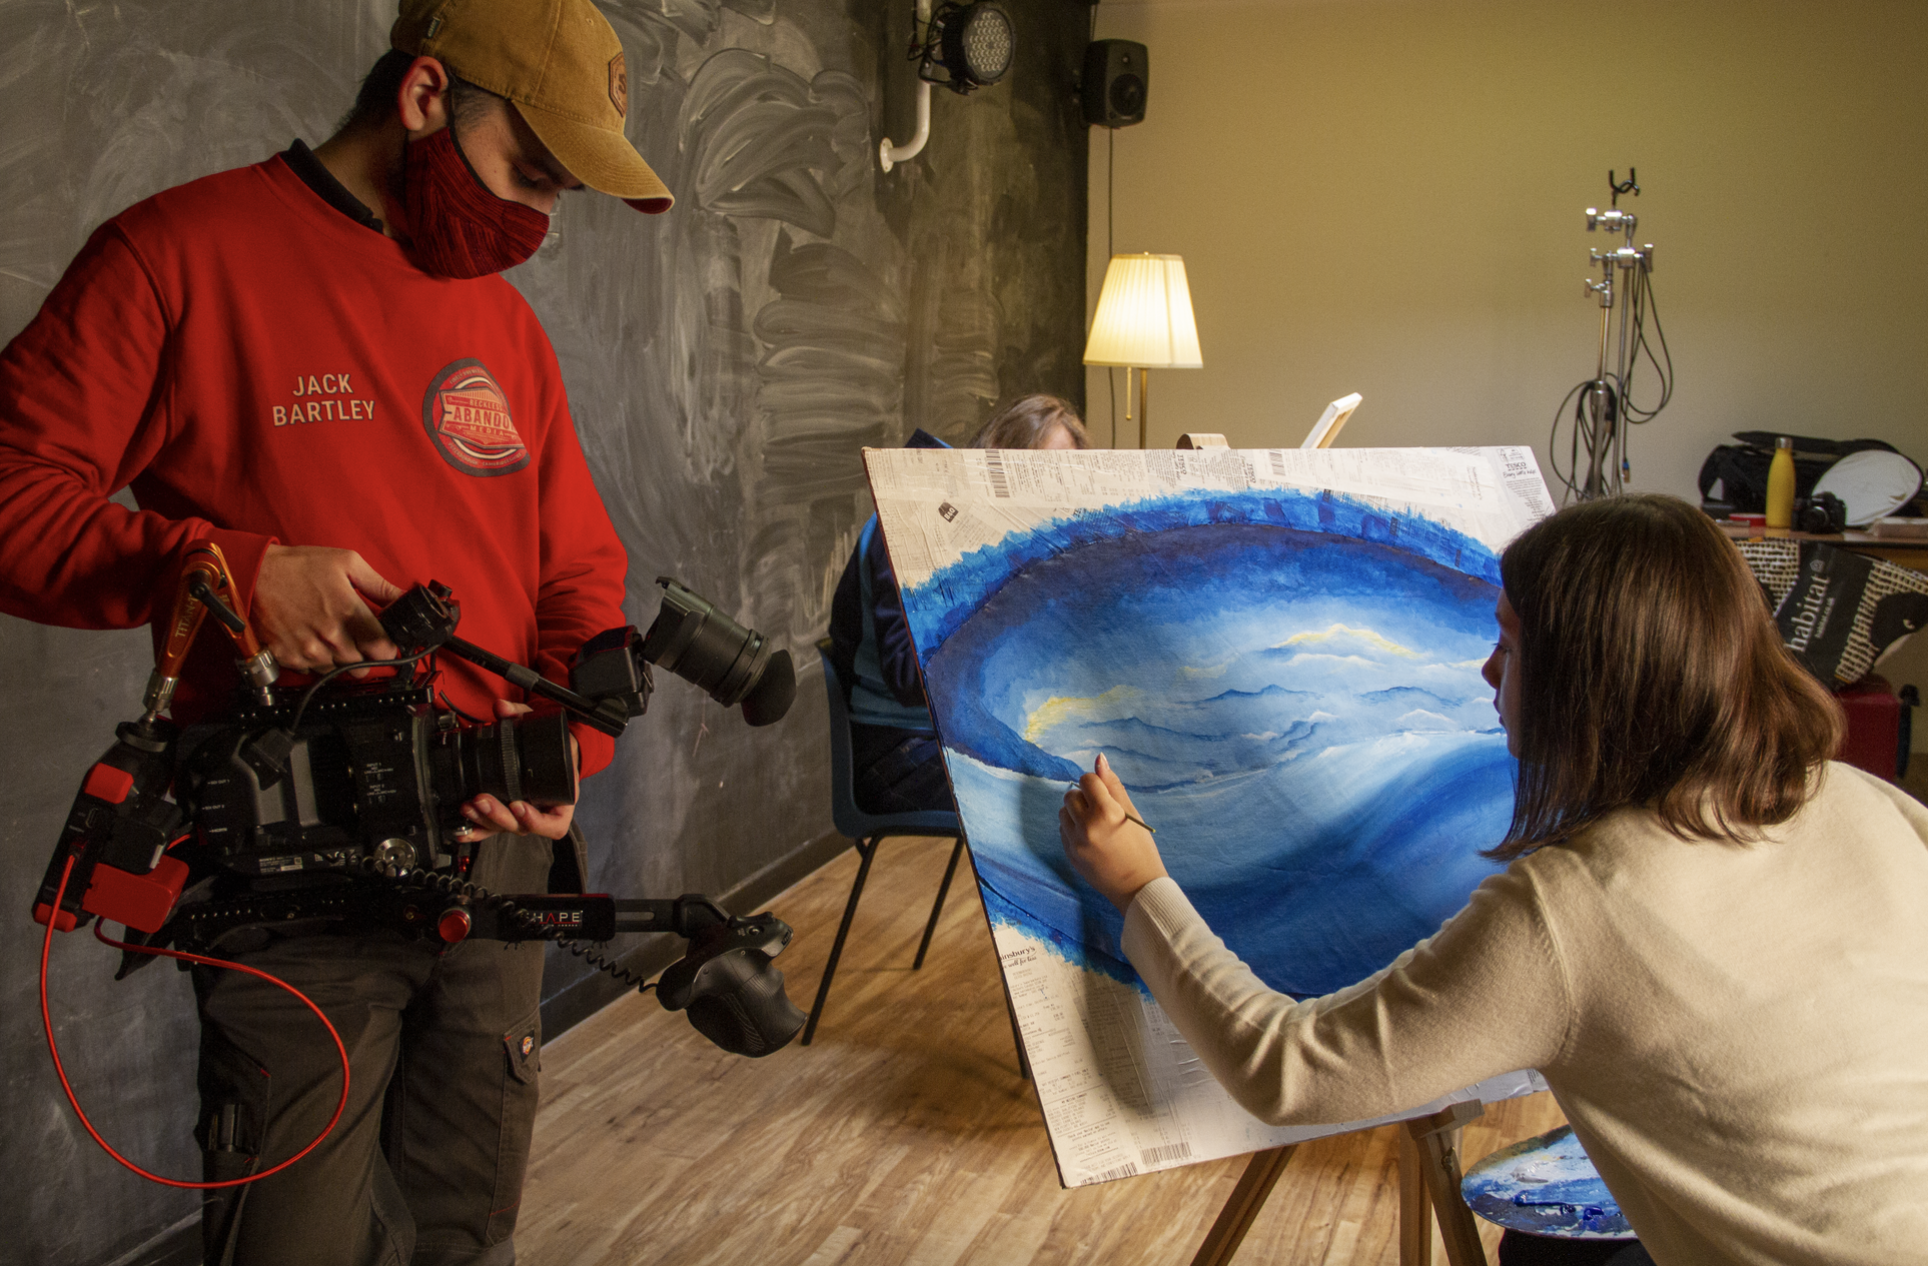 a filmmaker wearing red uses a large camera to record a female painter who is painting blue onto a large canvas